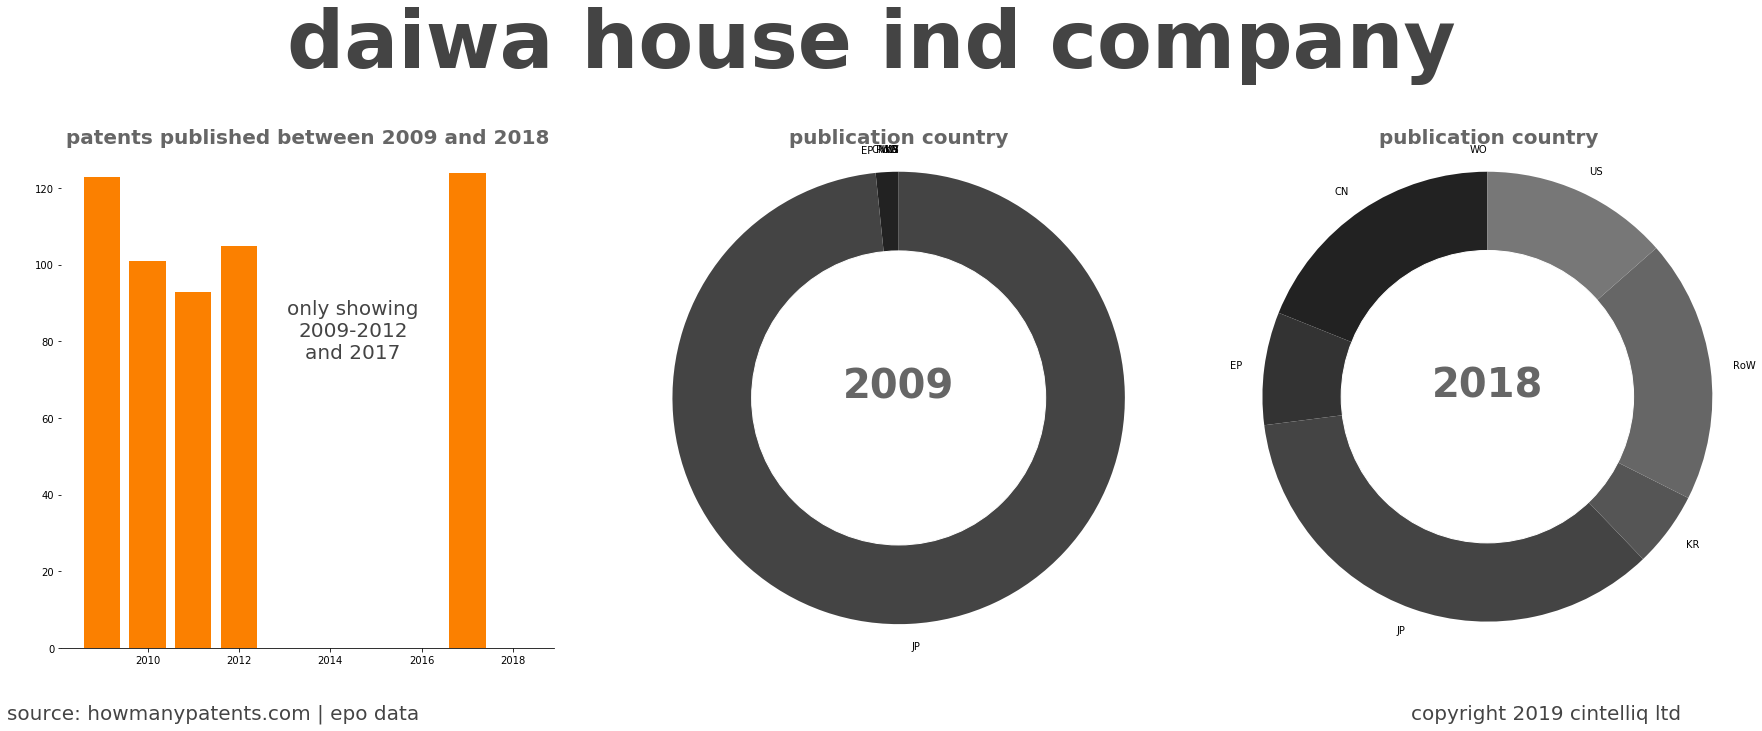 summary of patents for Daiwa House Ind Company